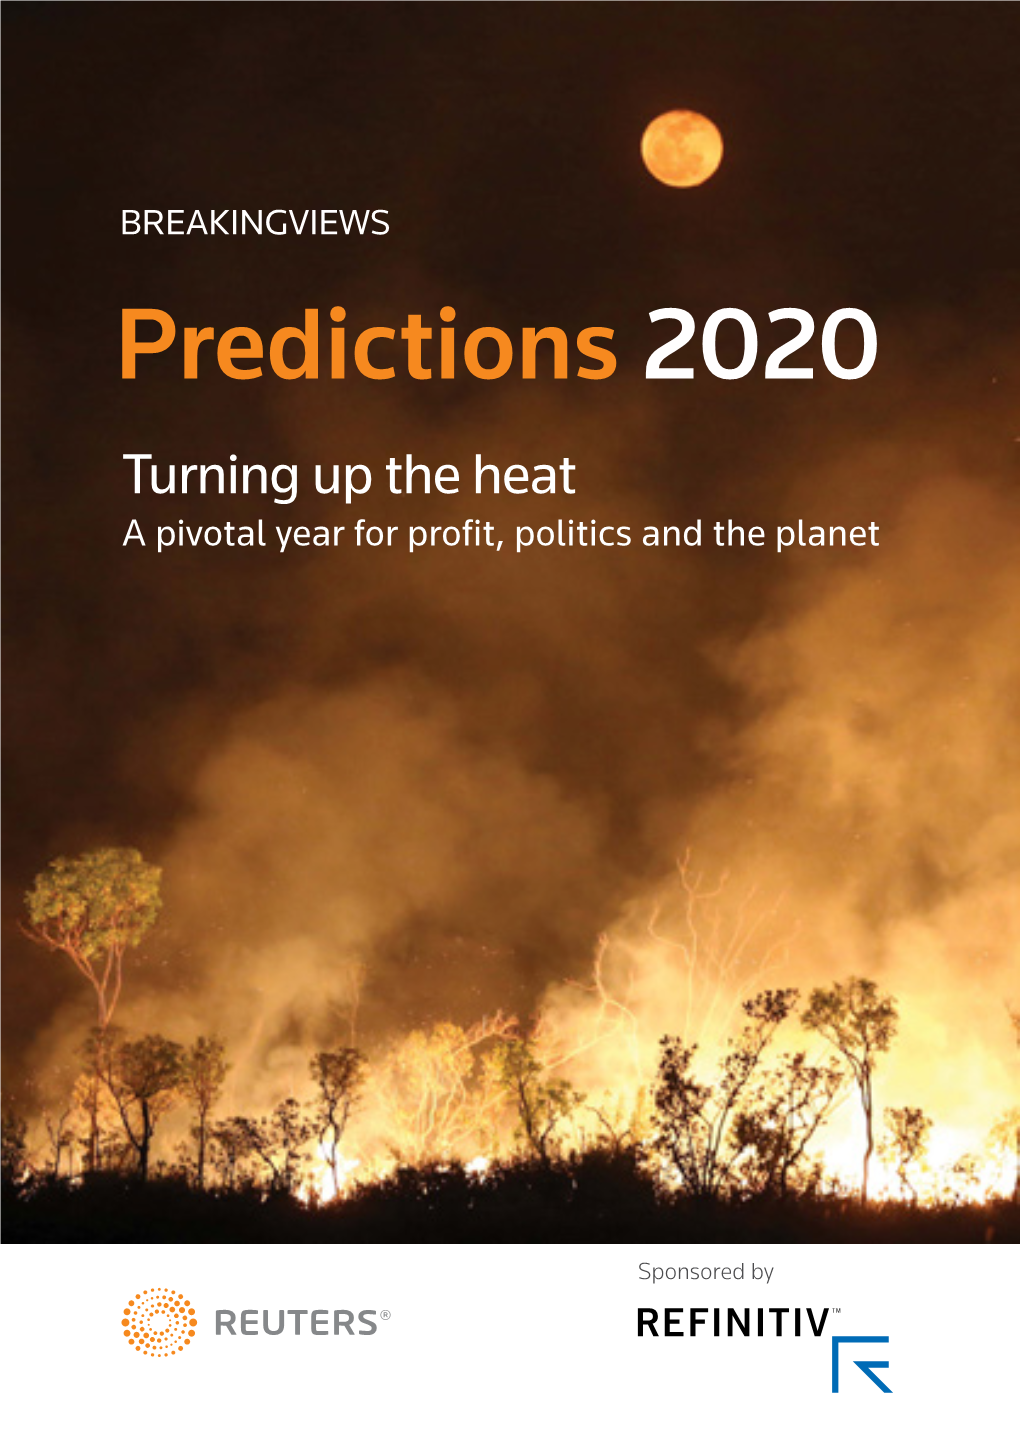 Predictions 2020 Turning up the Heat a Pivotal Year for Proft, Politics and the Planet